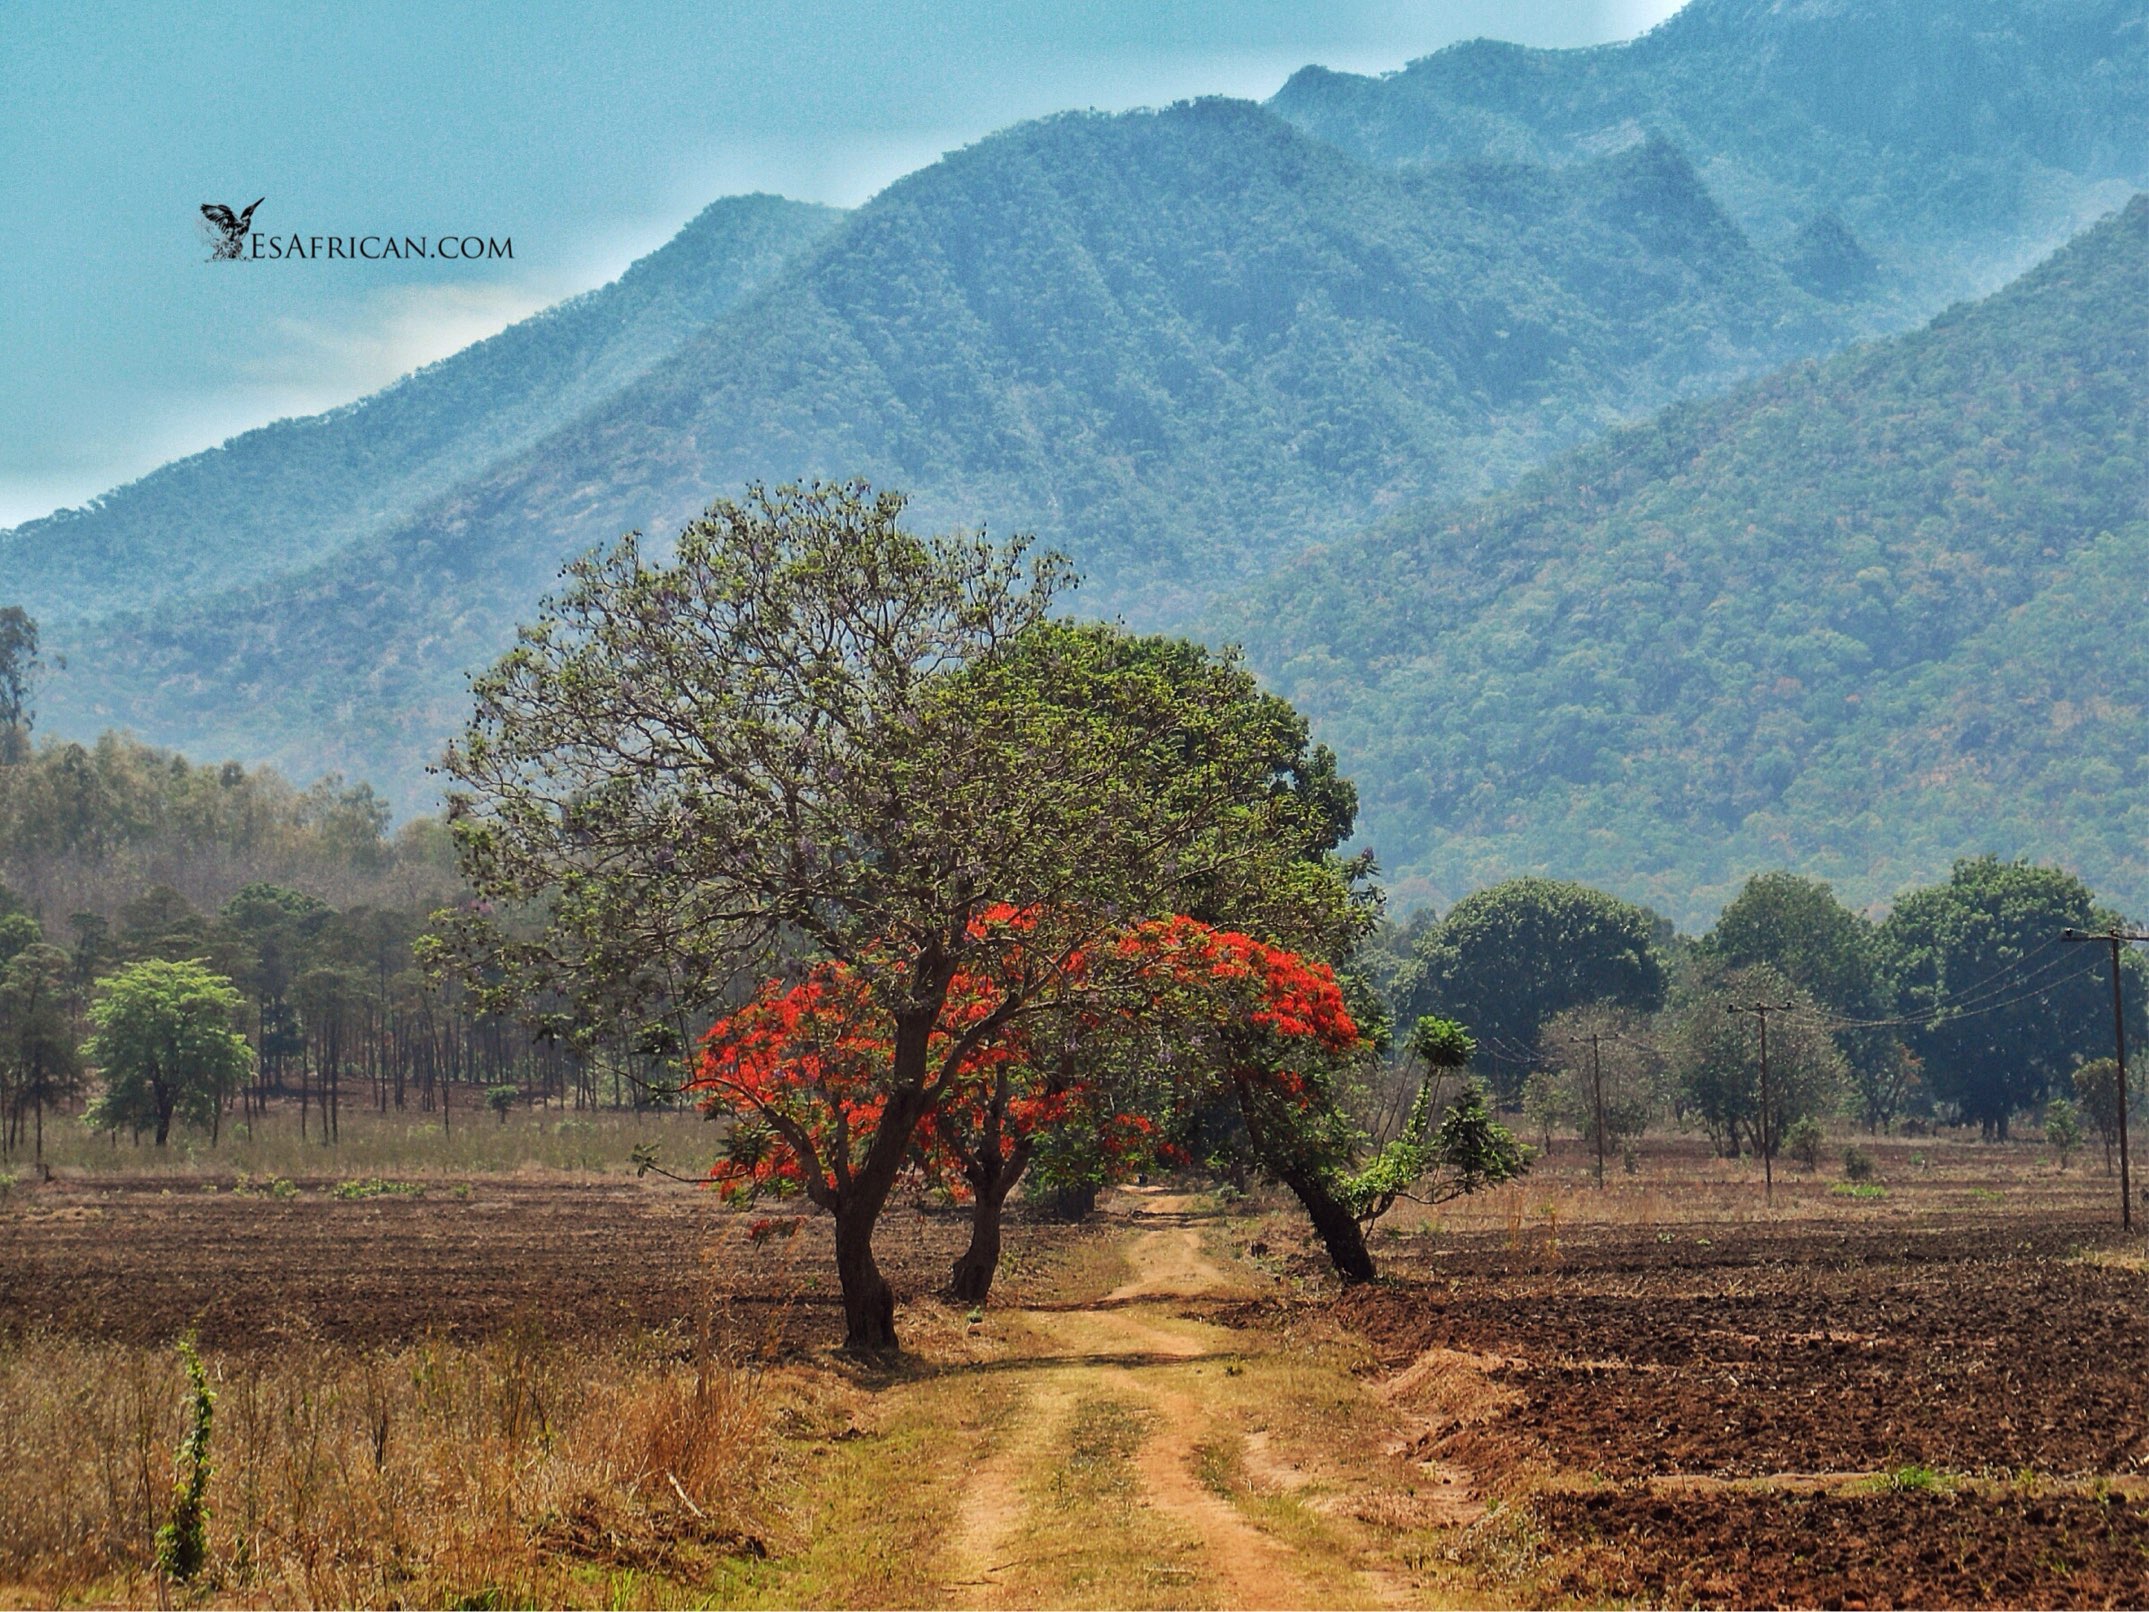 Flame Trees near Mulanje. Many of the most beautiful and surprising places in Malawi are found on the roads less traveled.